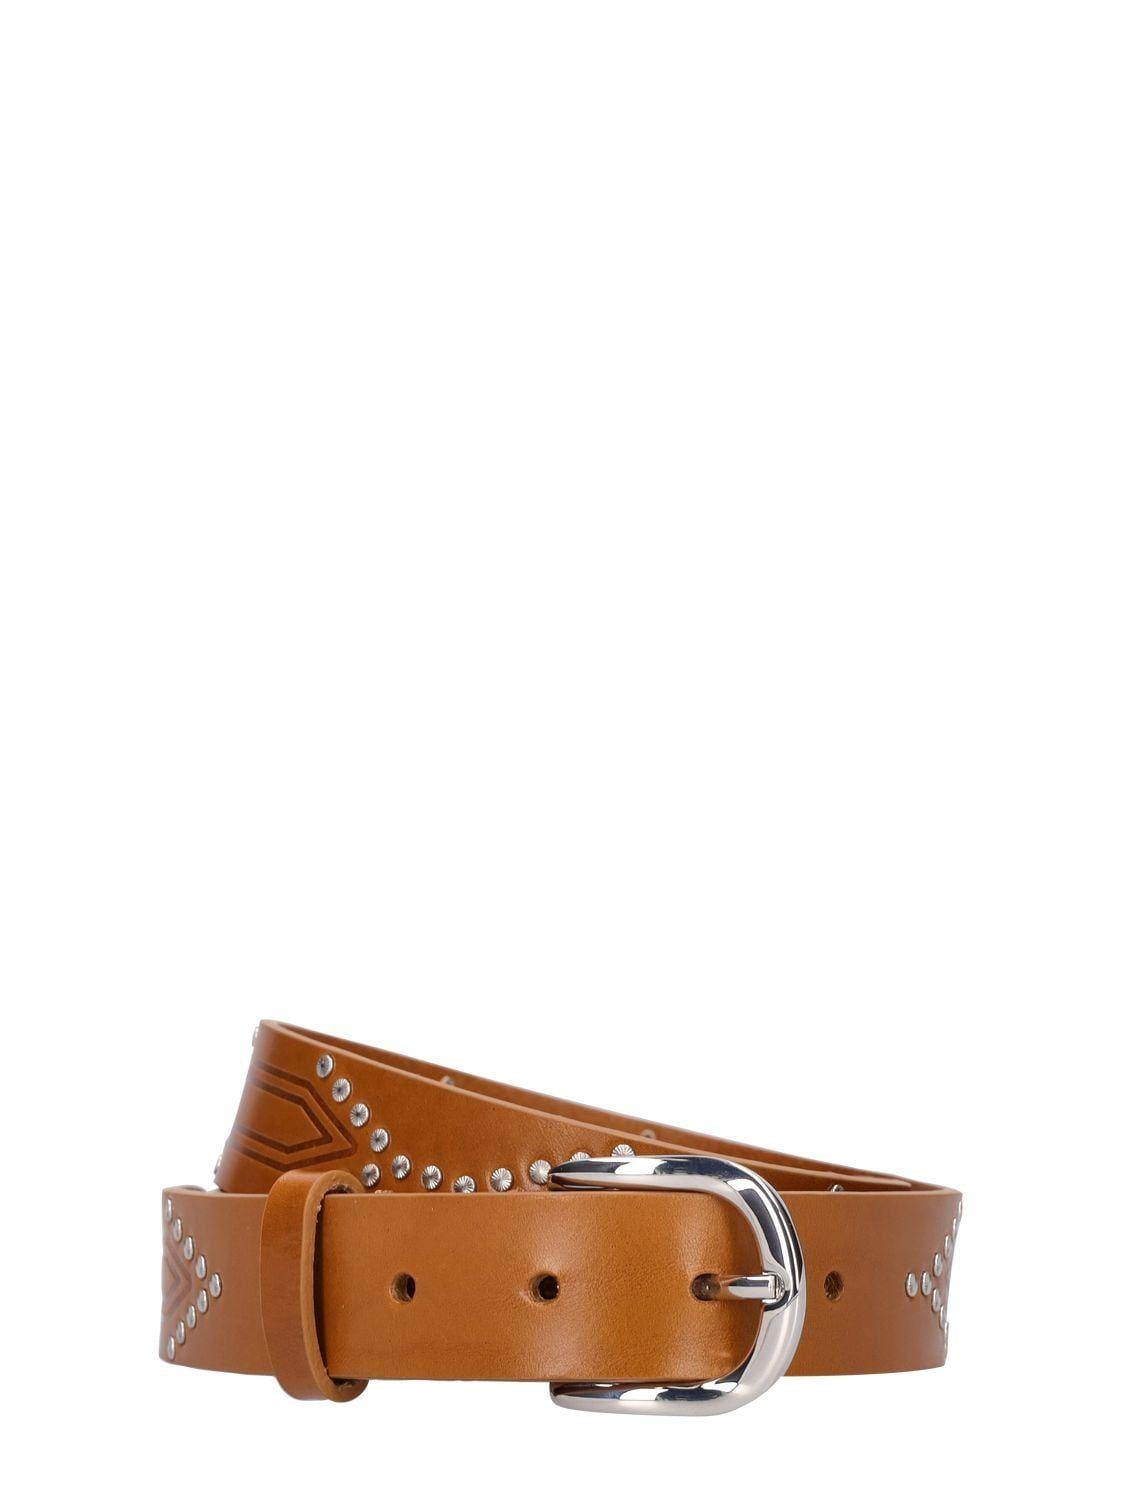 Isabel Marant Telly Studded Leather Belt in Brown | Lyst